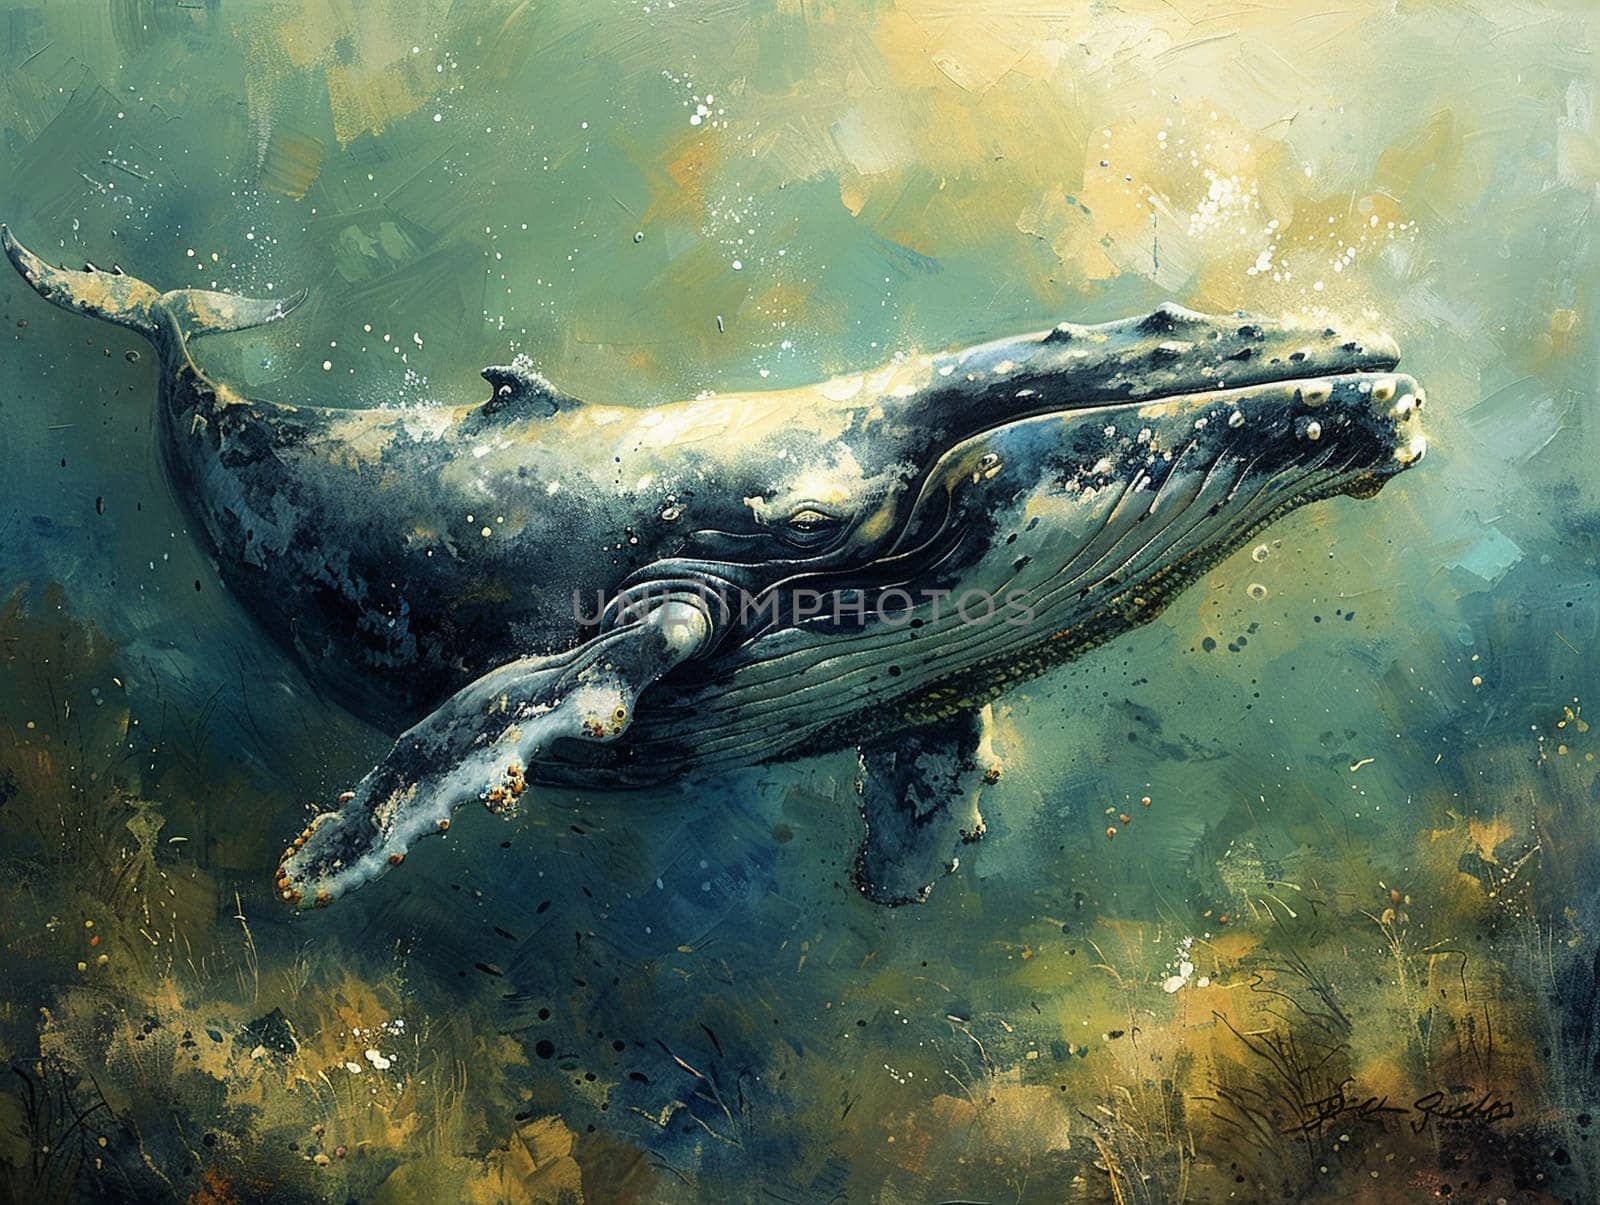 Whale diving into the depths, beautiful royalty-free painting capturing the majestic and serene underwater world.